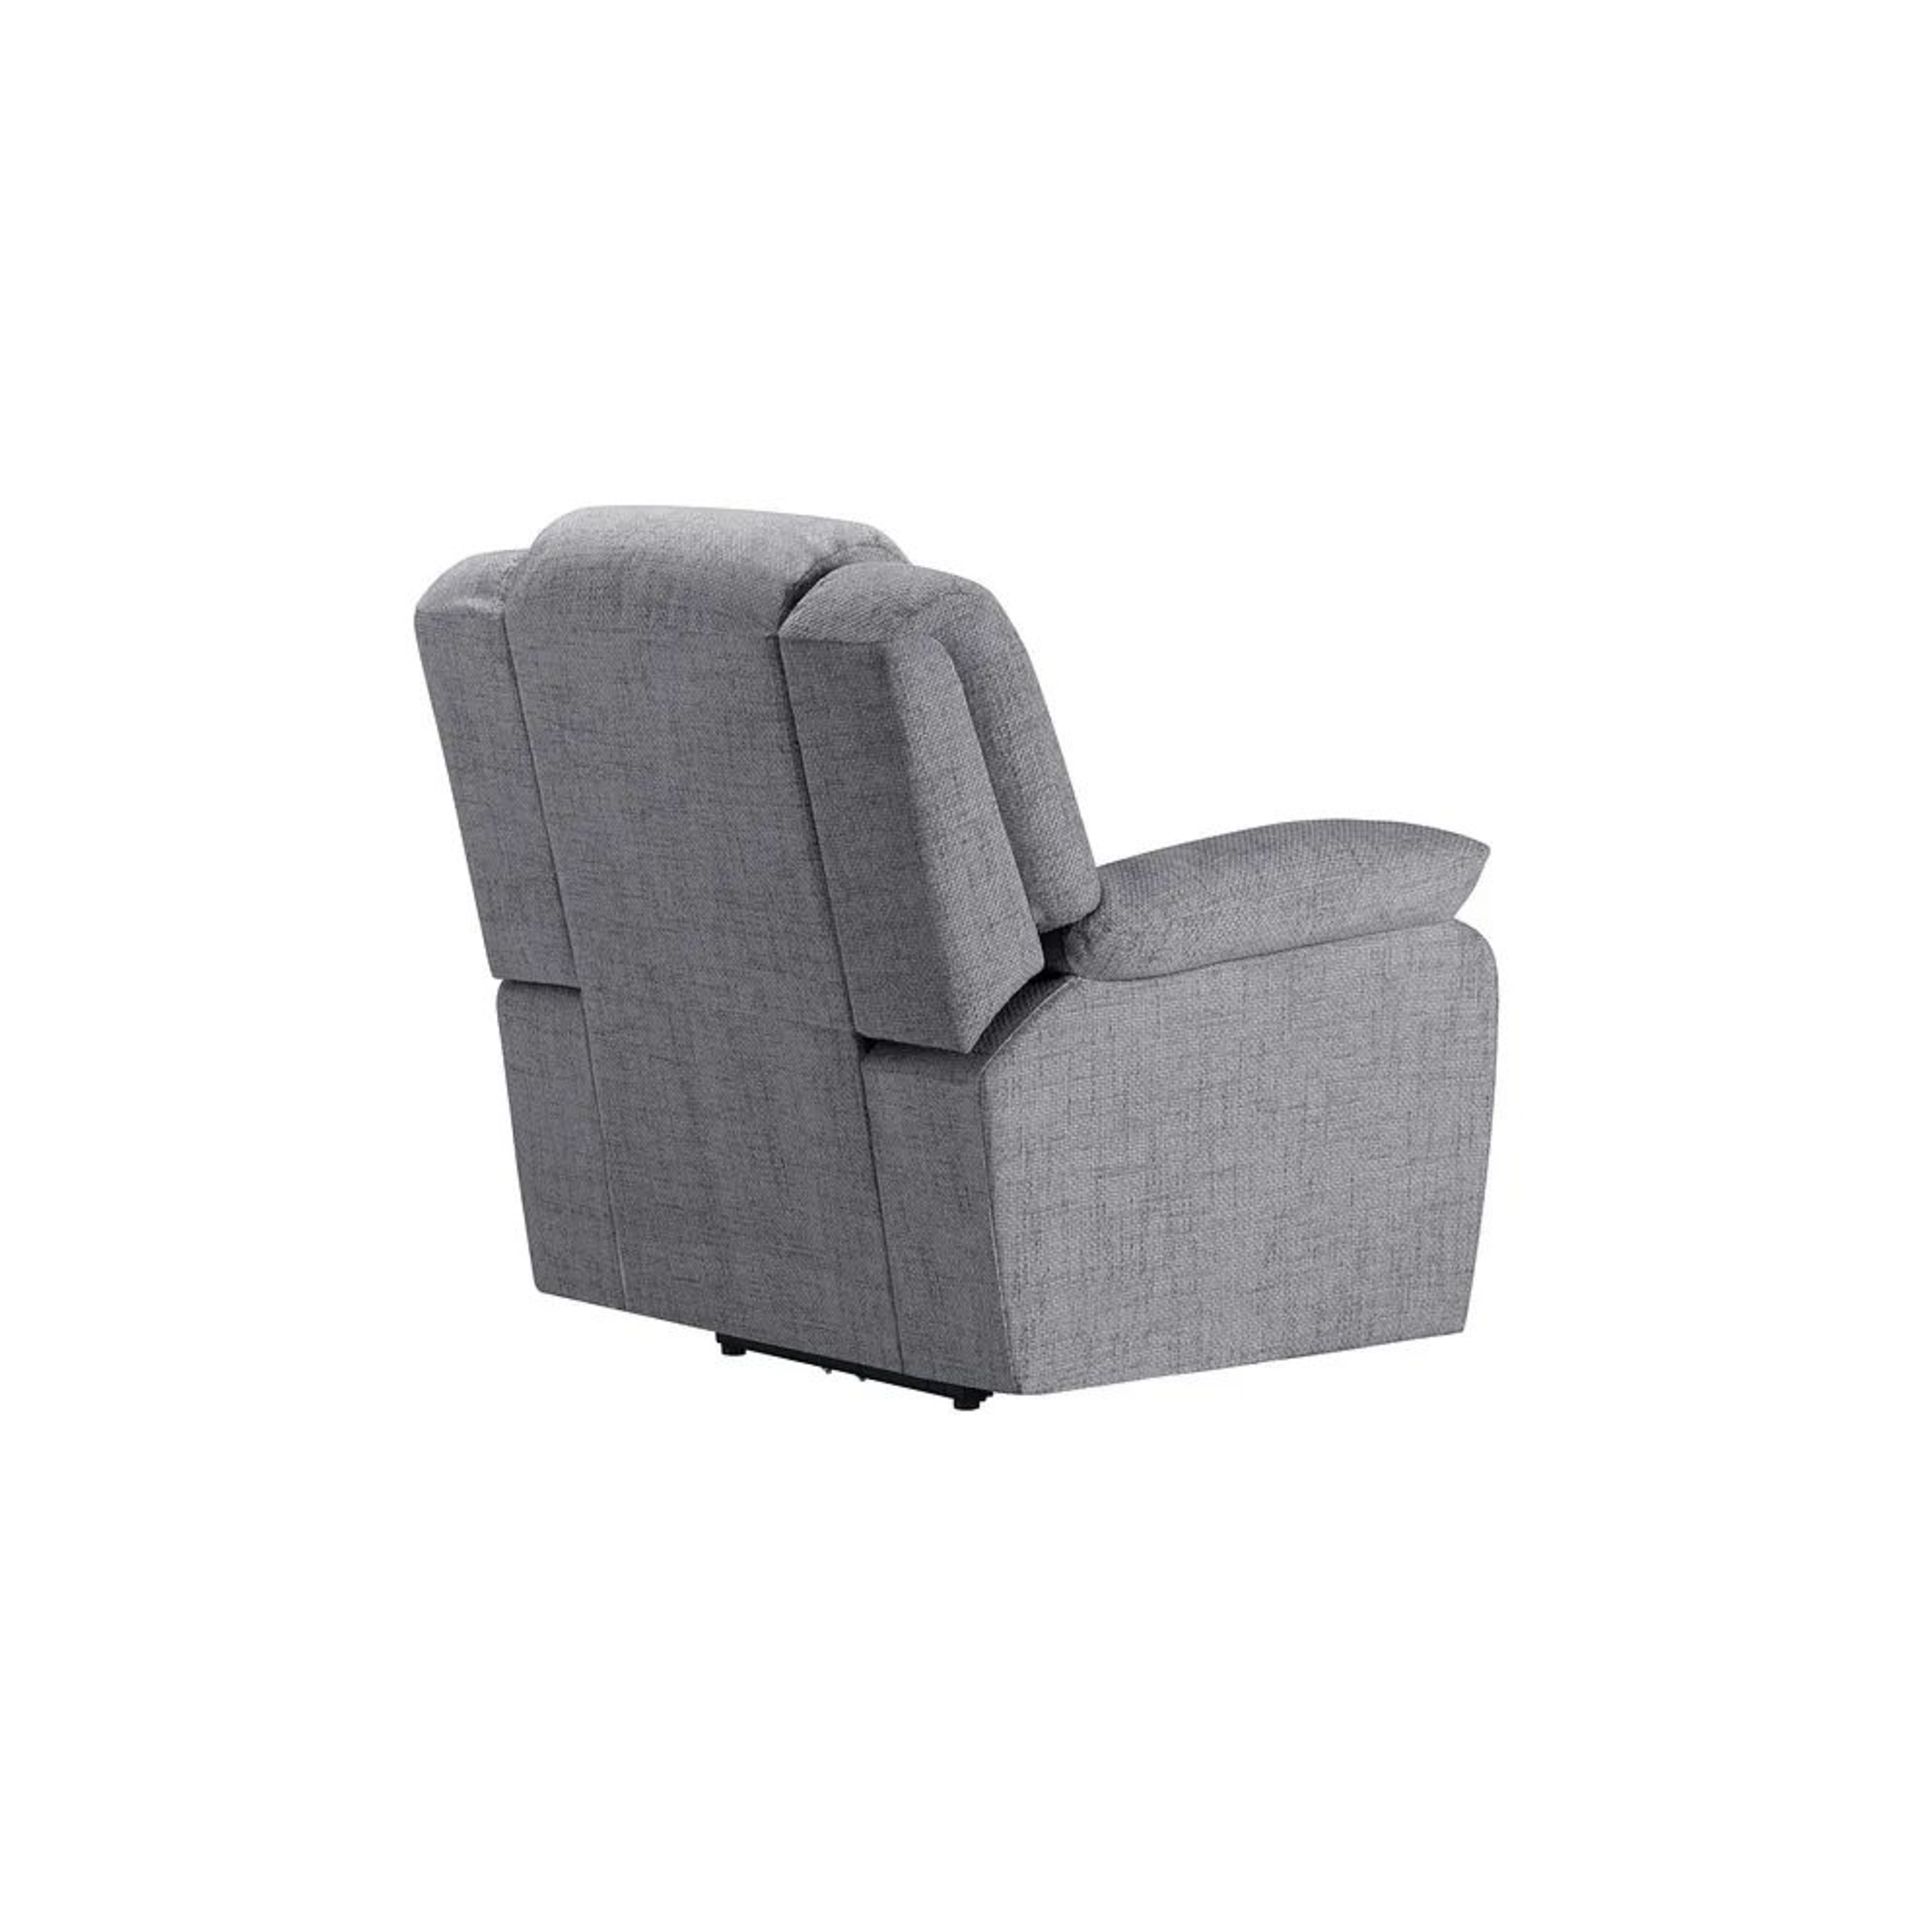 BRAND NEW MARLOW Armchair - SANTOS STEEL FABRIC. RRP £579. Designed to suit any home, our Marlow - Image 3 of 5